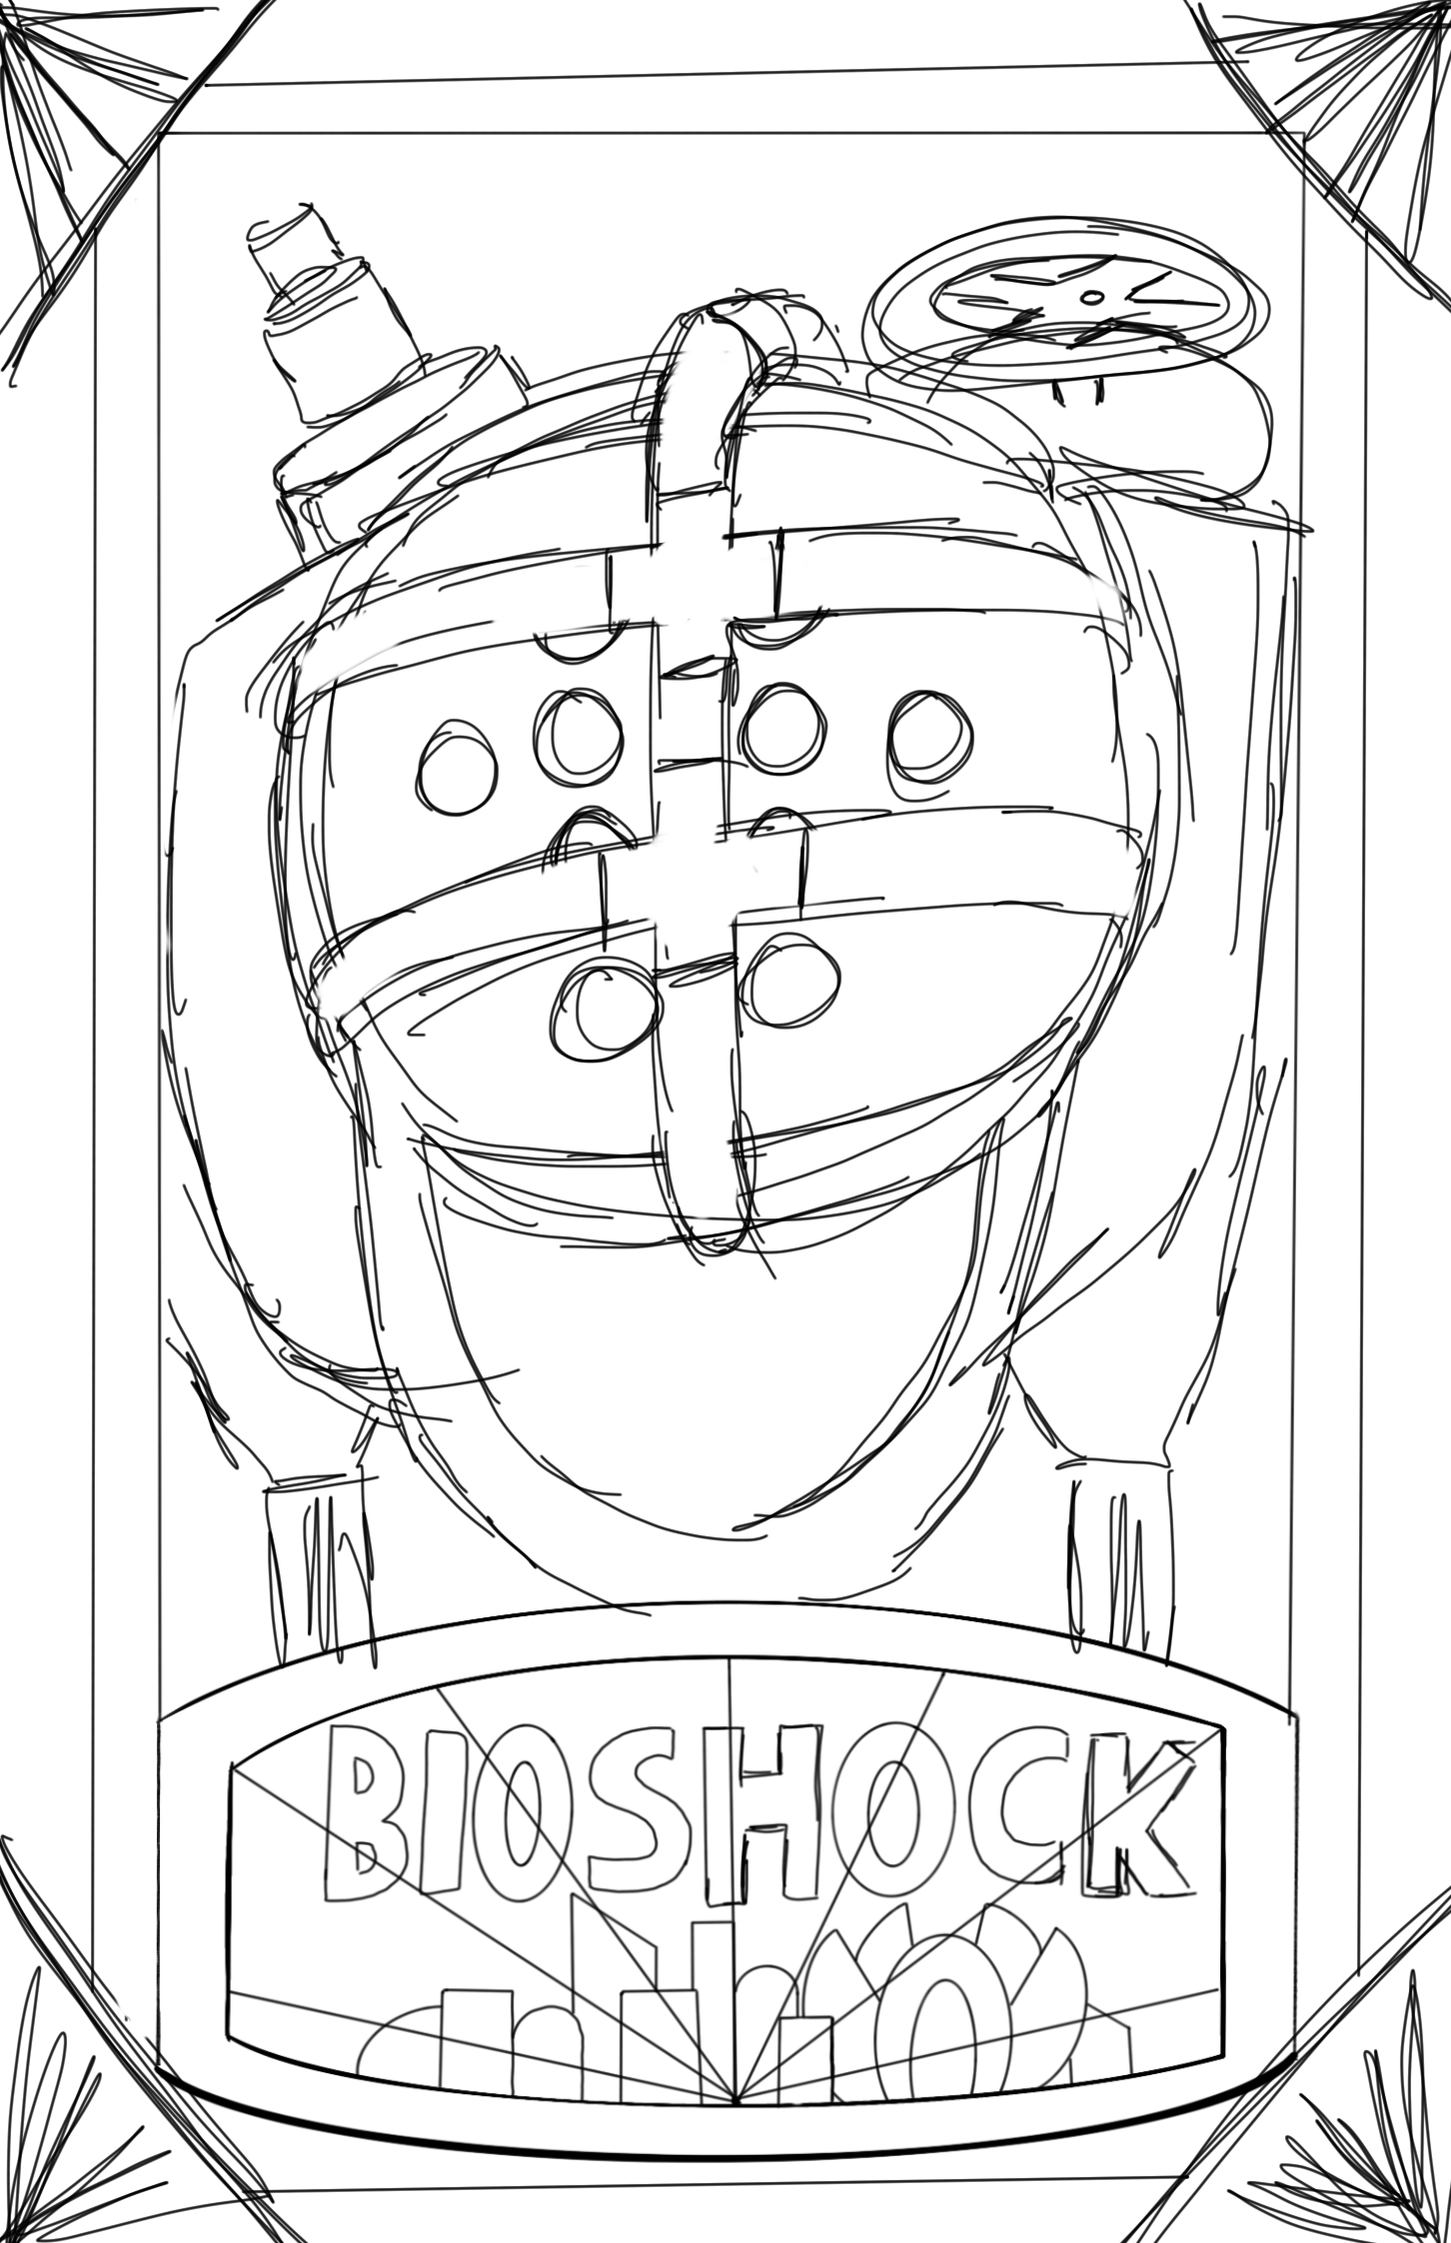 Big Daddy poster sketch with corner borders and the game title